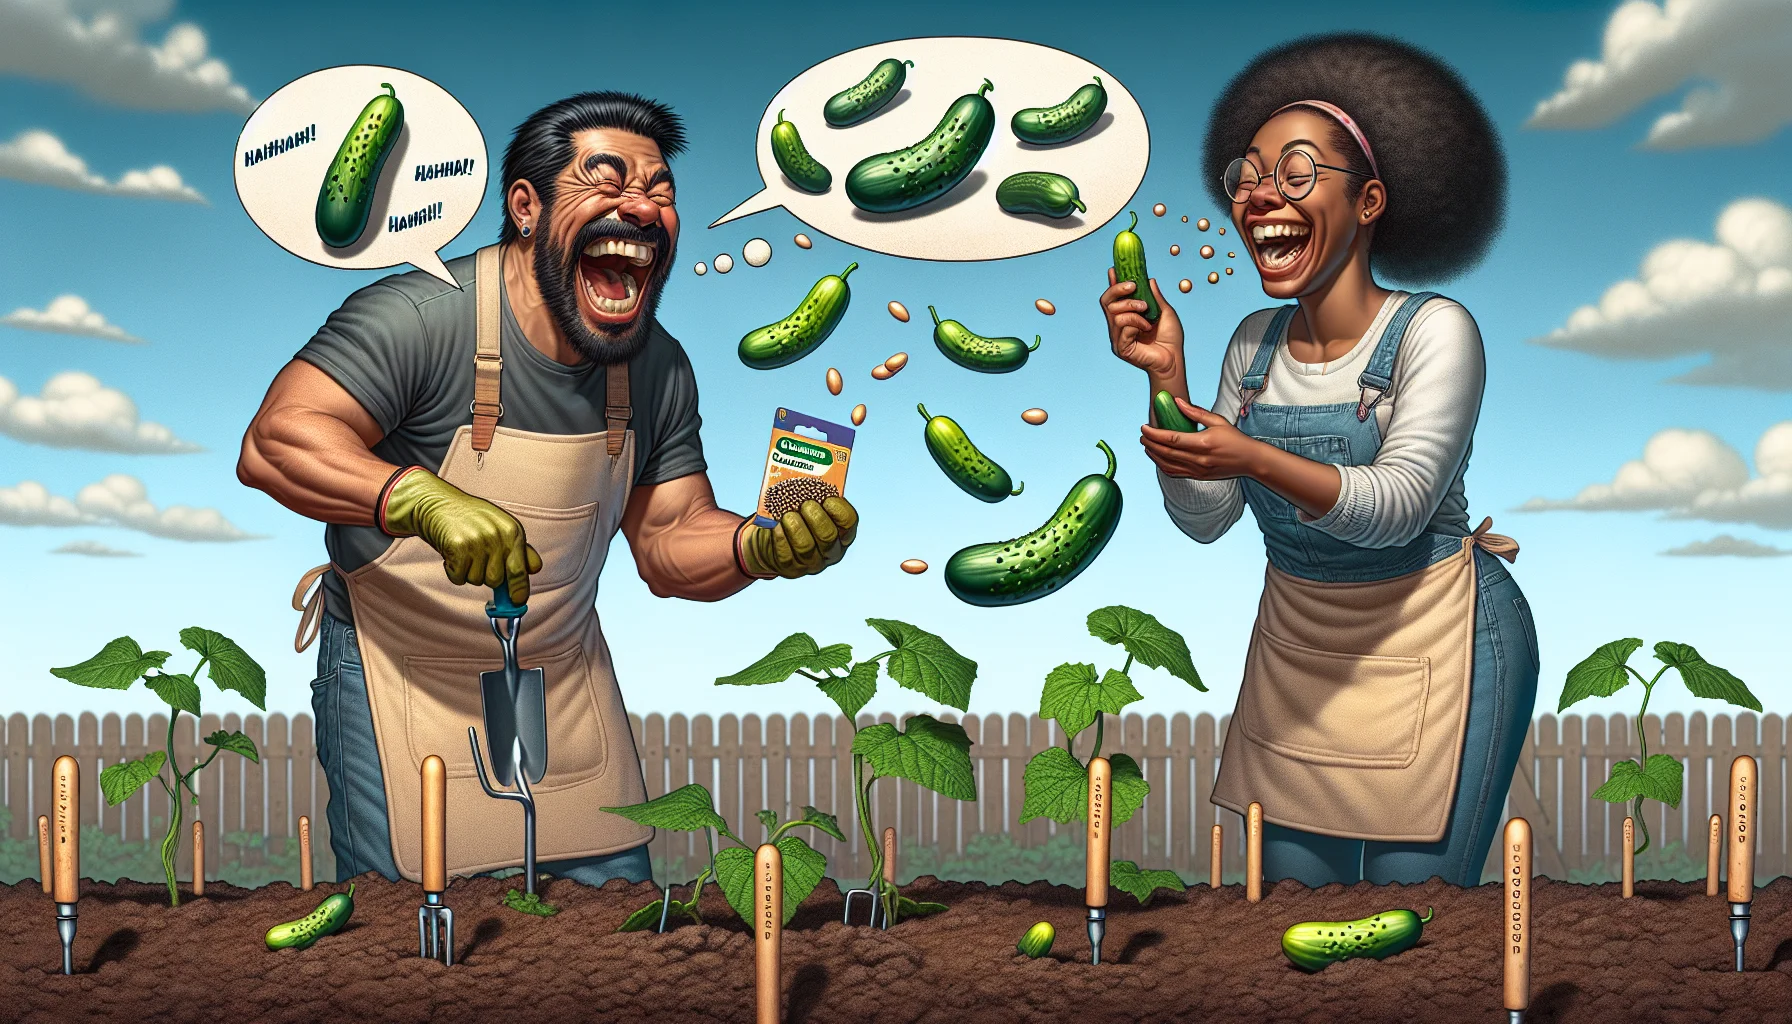 An entertaining, realistic image, replete with humor, depicting the process of planting cucumber seeds. In the foreground, a Hispanic male in a gardening apron is laughing as a cucumber seed bounces off the tip of his nose, while a Black female, also in gardening clothes, giggles holding a pack of cucumber seeds. They stand poised over a well-tilled plot of land, ready to plant. Basic illustrated steps to plant cucumber seeds are displayed floating in the air around them like comic bubbles, adding a whimsical touch to the image. All in all, the scene conveys the joy and fun that can be found in gardening.